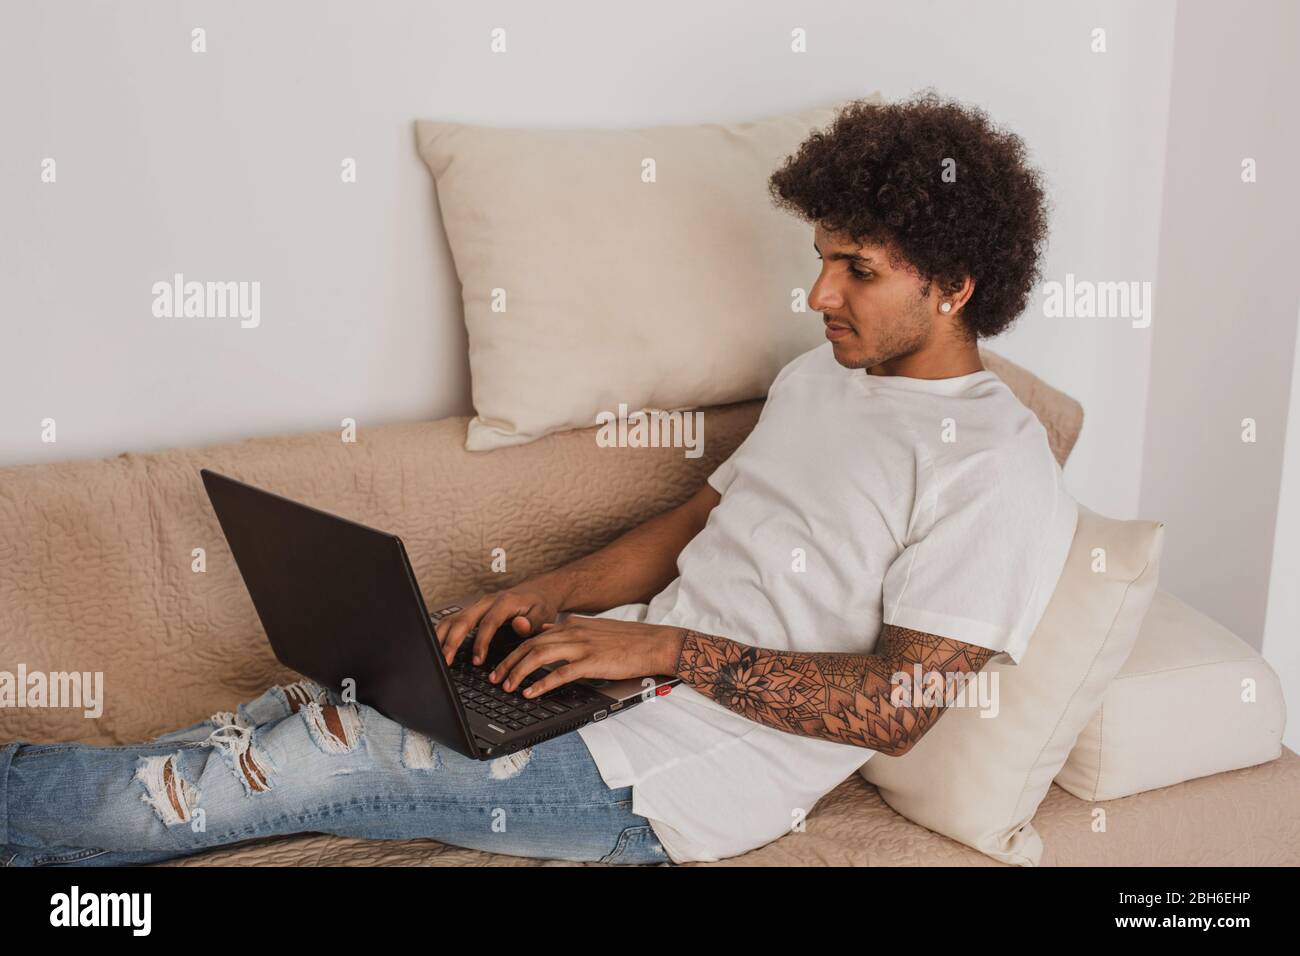 Young man, a mulatto with curly hair, relaxed on the couch using a laptop, at home Stock Photo